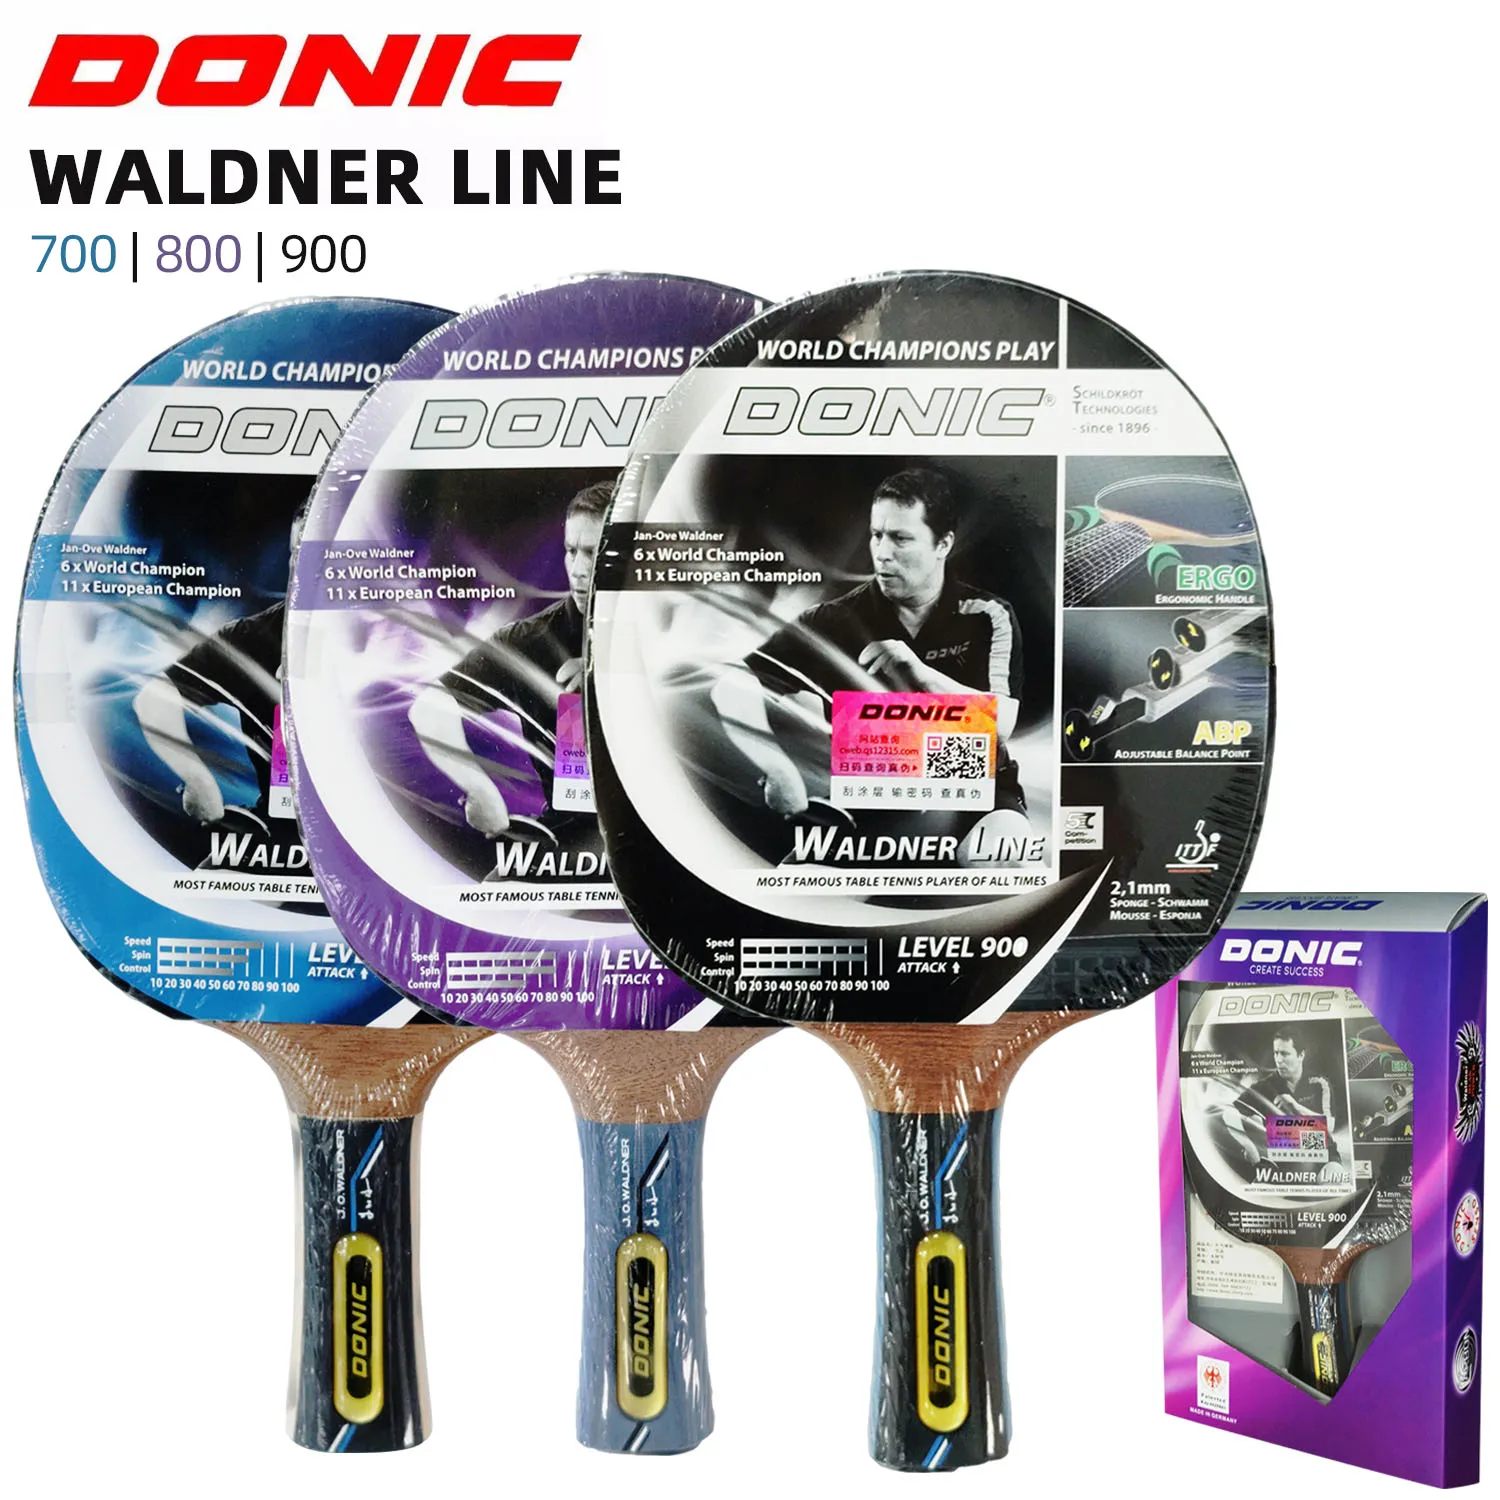 

DONIC WALDNER LINE Table Tennis Racket Professional 700/800/900 Ping Pong Racket Bat for Good Spin & Speed